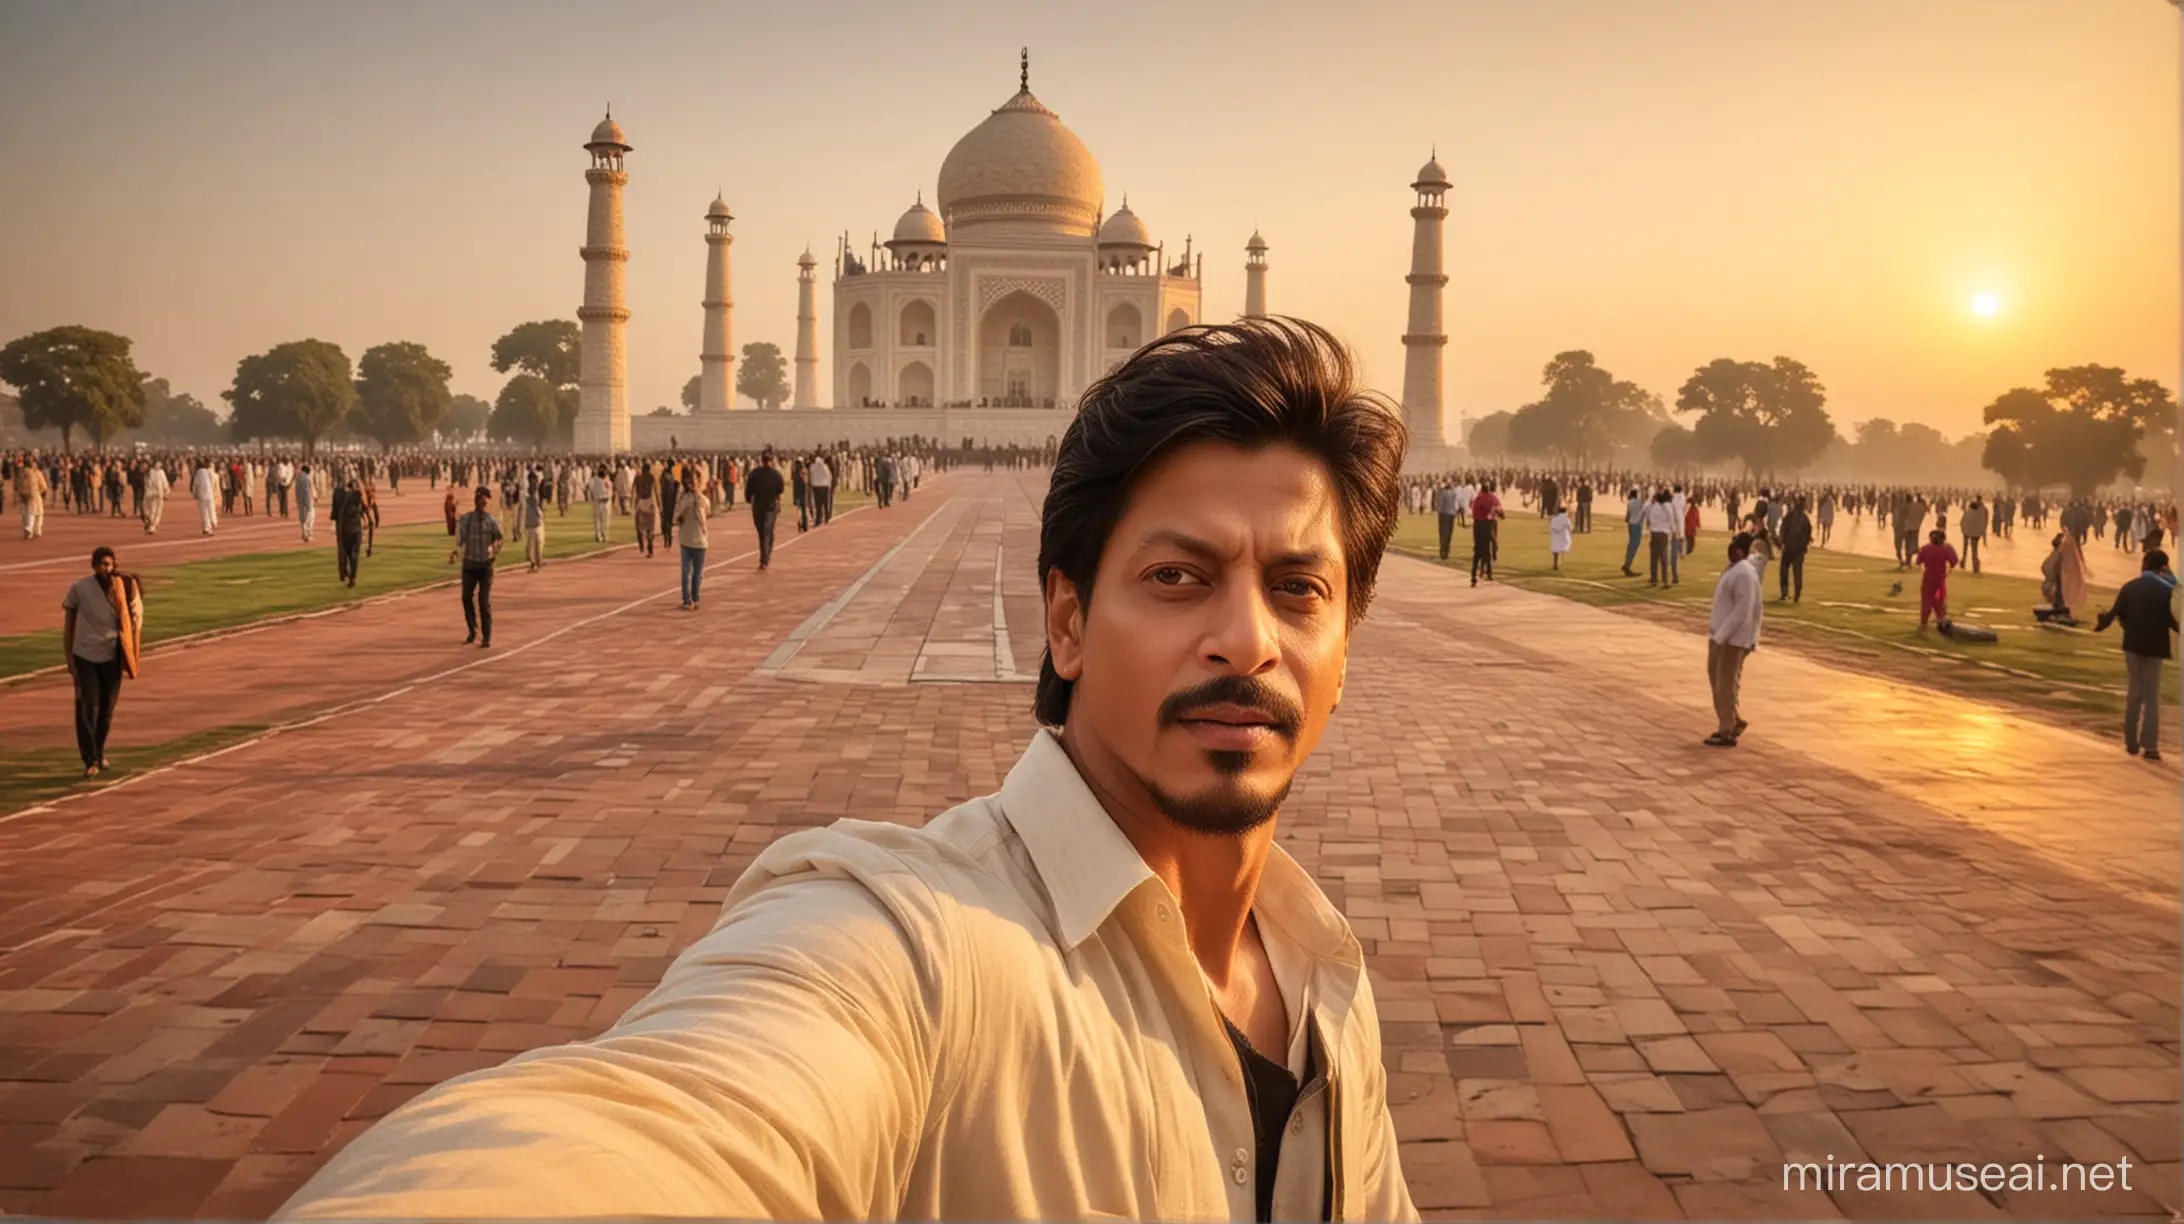 Create a highly detailed and sharp image of Bollywood superstar Shahrukh Khan taking a selfie in front of the Taj Mahal. The scene should capture the natural light of sunset behind him, casting a warm glow over the iconic monument. The focus should be sharp, highlighting both Shahrukh Khan and the intricate details of the Taj Mahal